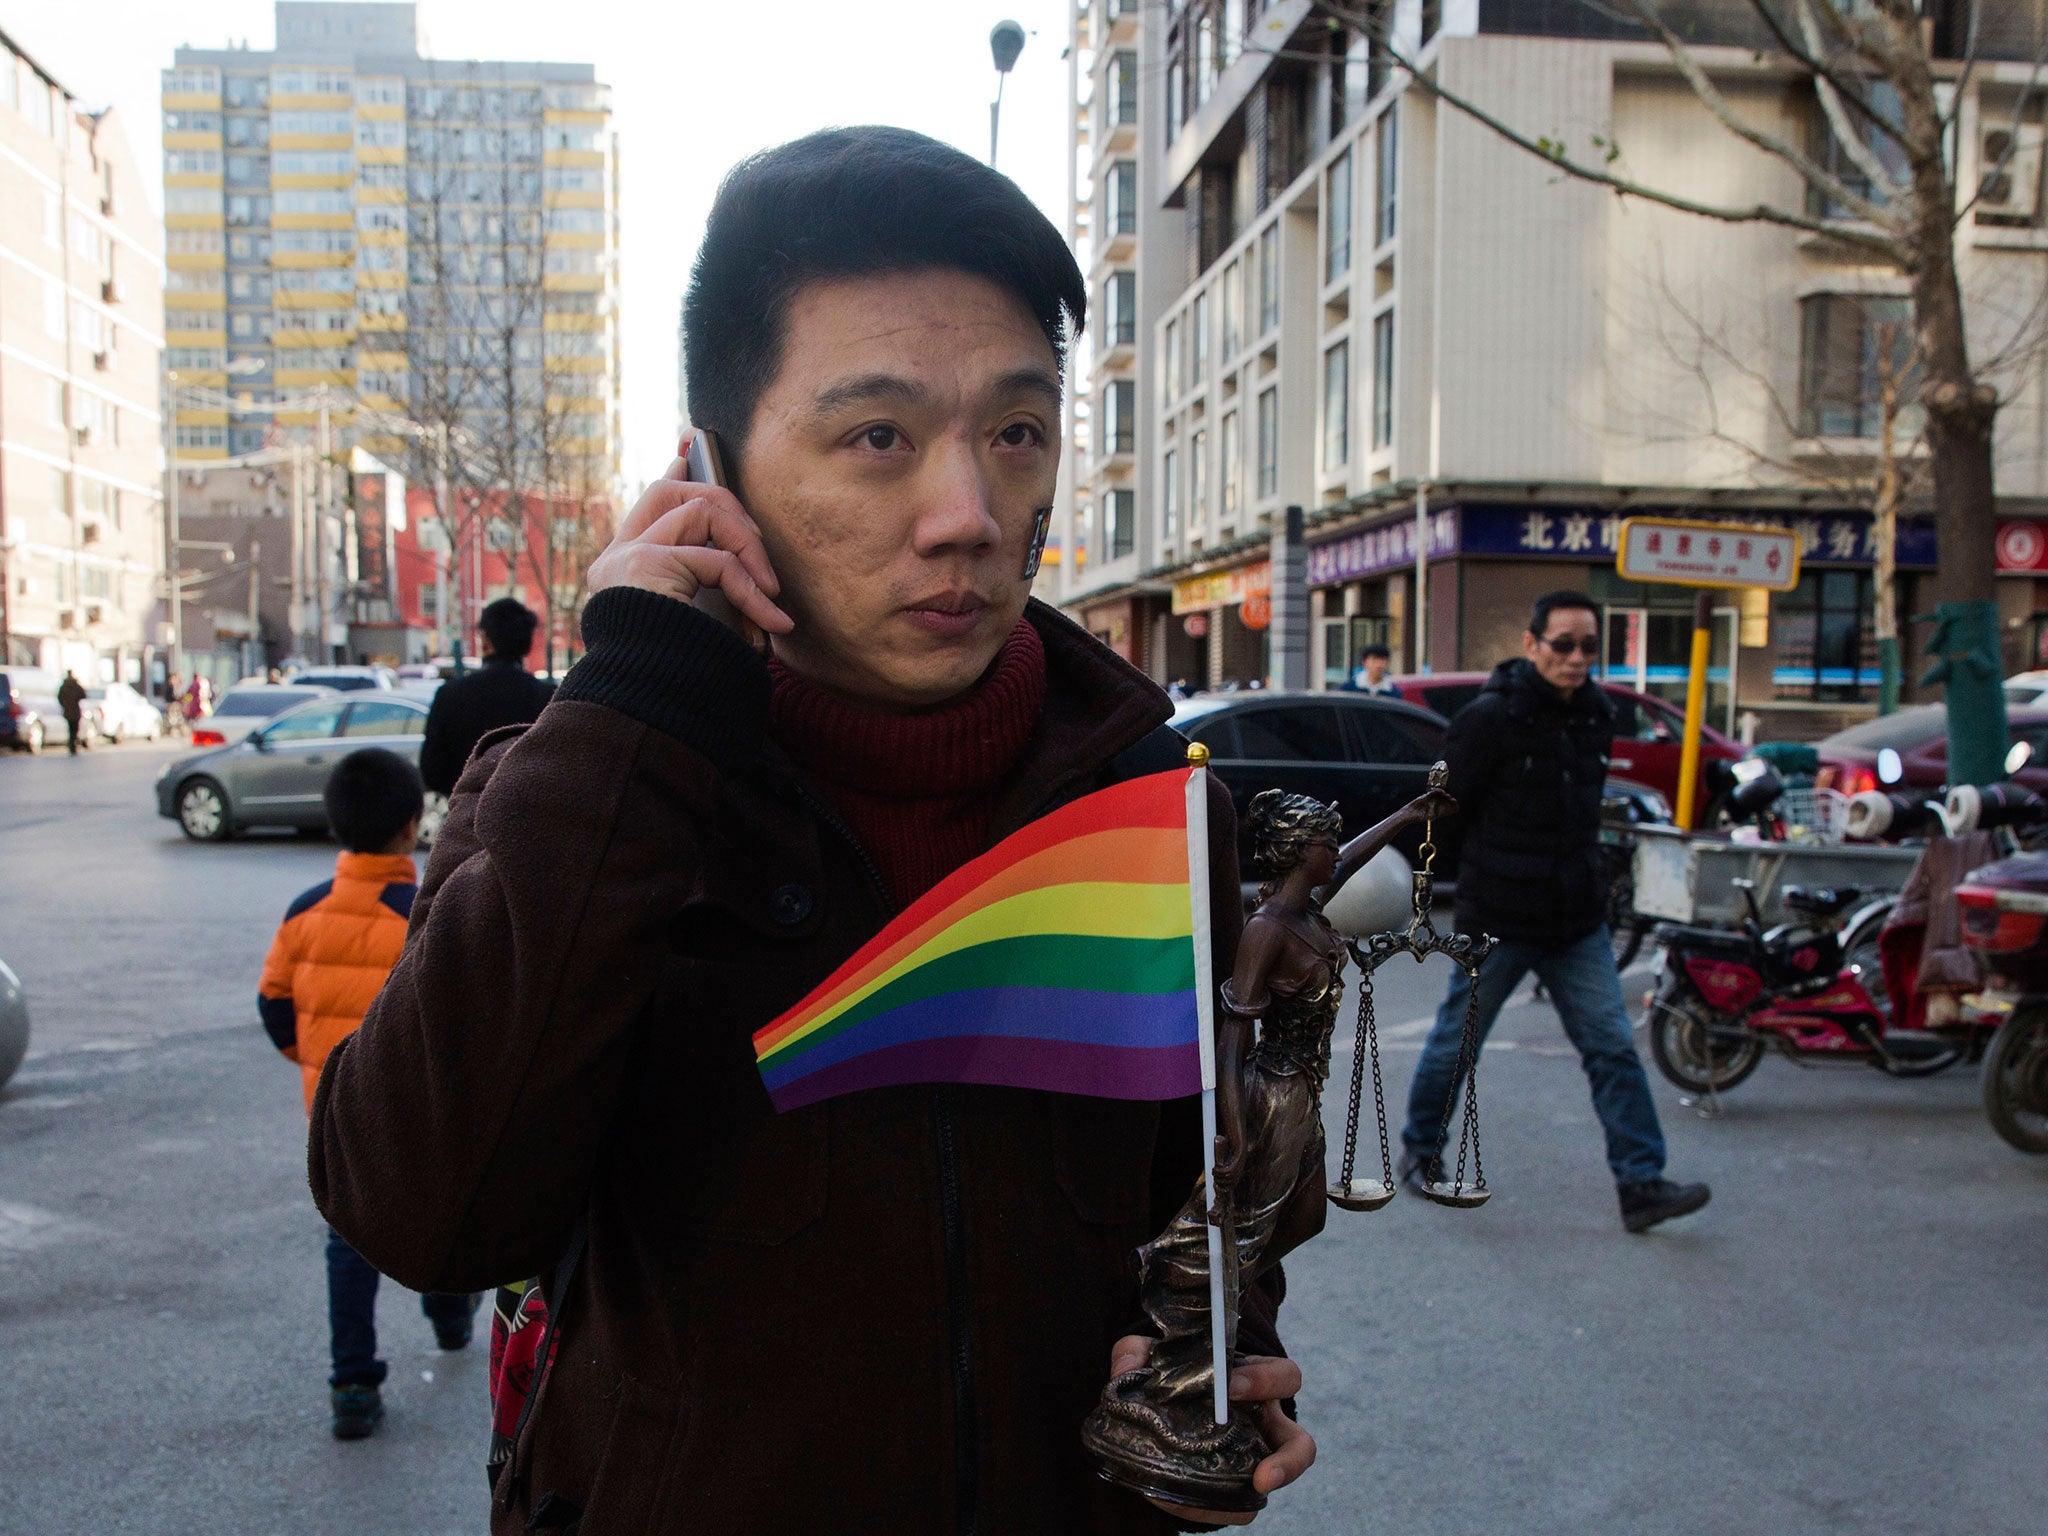 Yang Teng holds up a statue depicting a goddess of justice and a rainbow color flag as he arrives to attend a court verdict in Beijing, China, Friday, Dec. 19, 2014